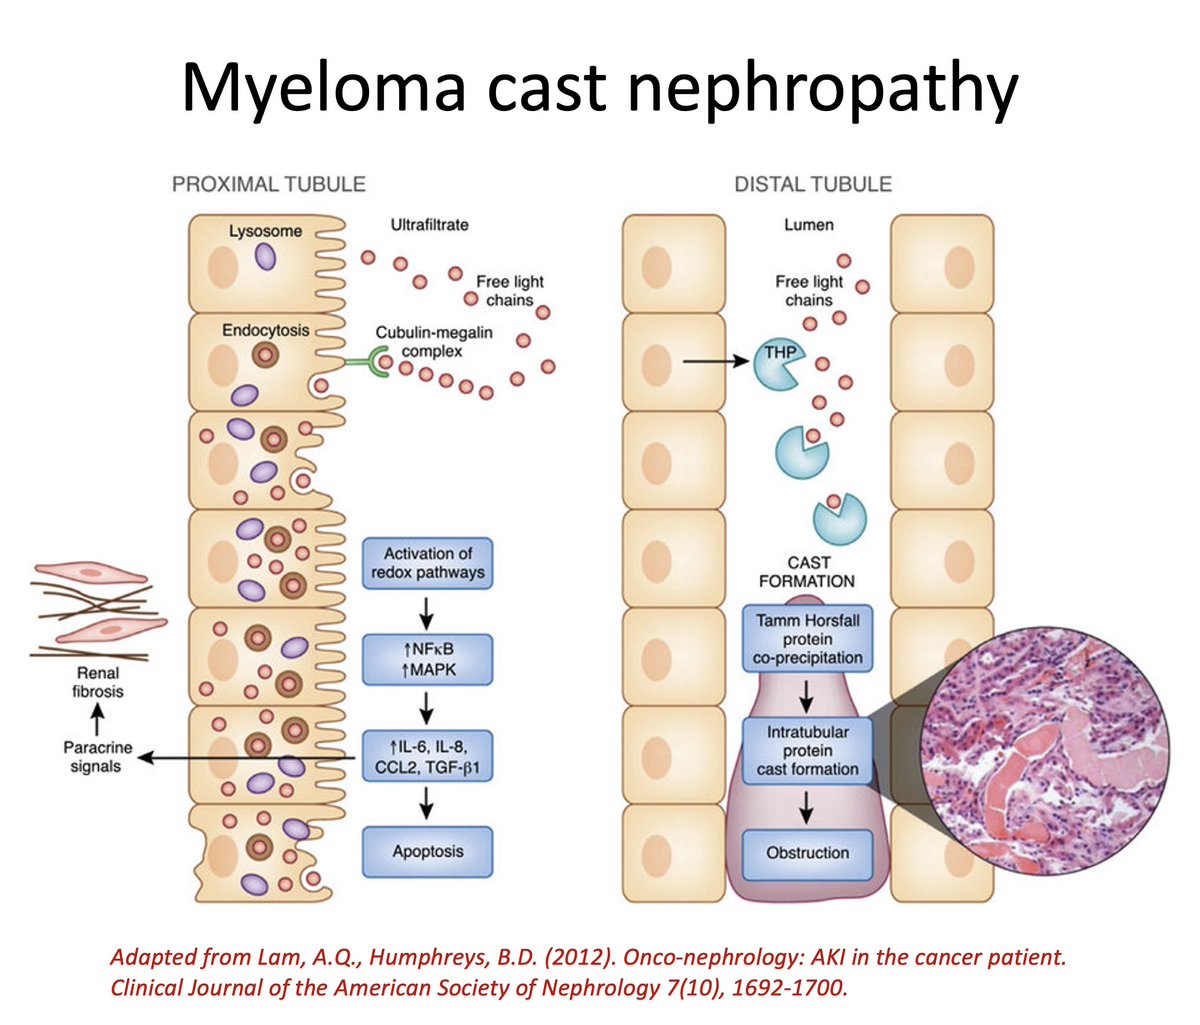 Myeloma kidney:  Under physiological conditions, free light chains (FLCs) are freely filtered through the glomerulus and are endocytosed by PCT cells through the megalin-cubulin receptor complex, and catabolised. In patients with MM, the overproduction of FLCs overcomes the